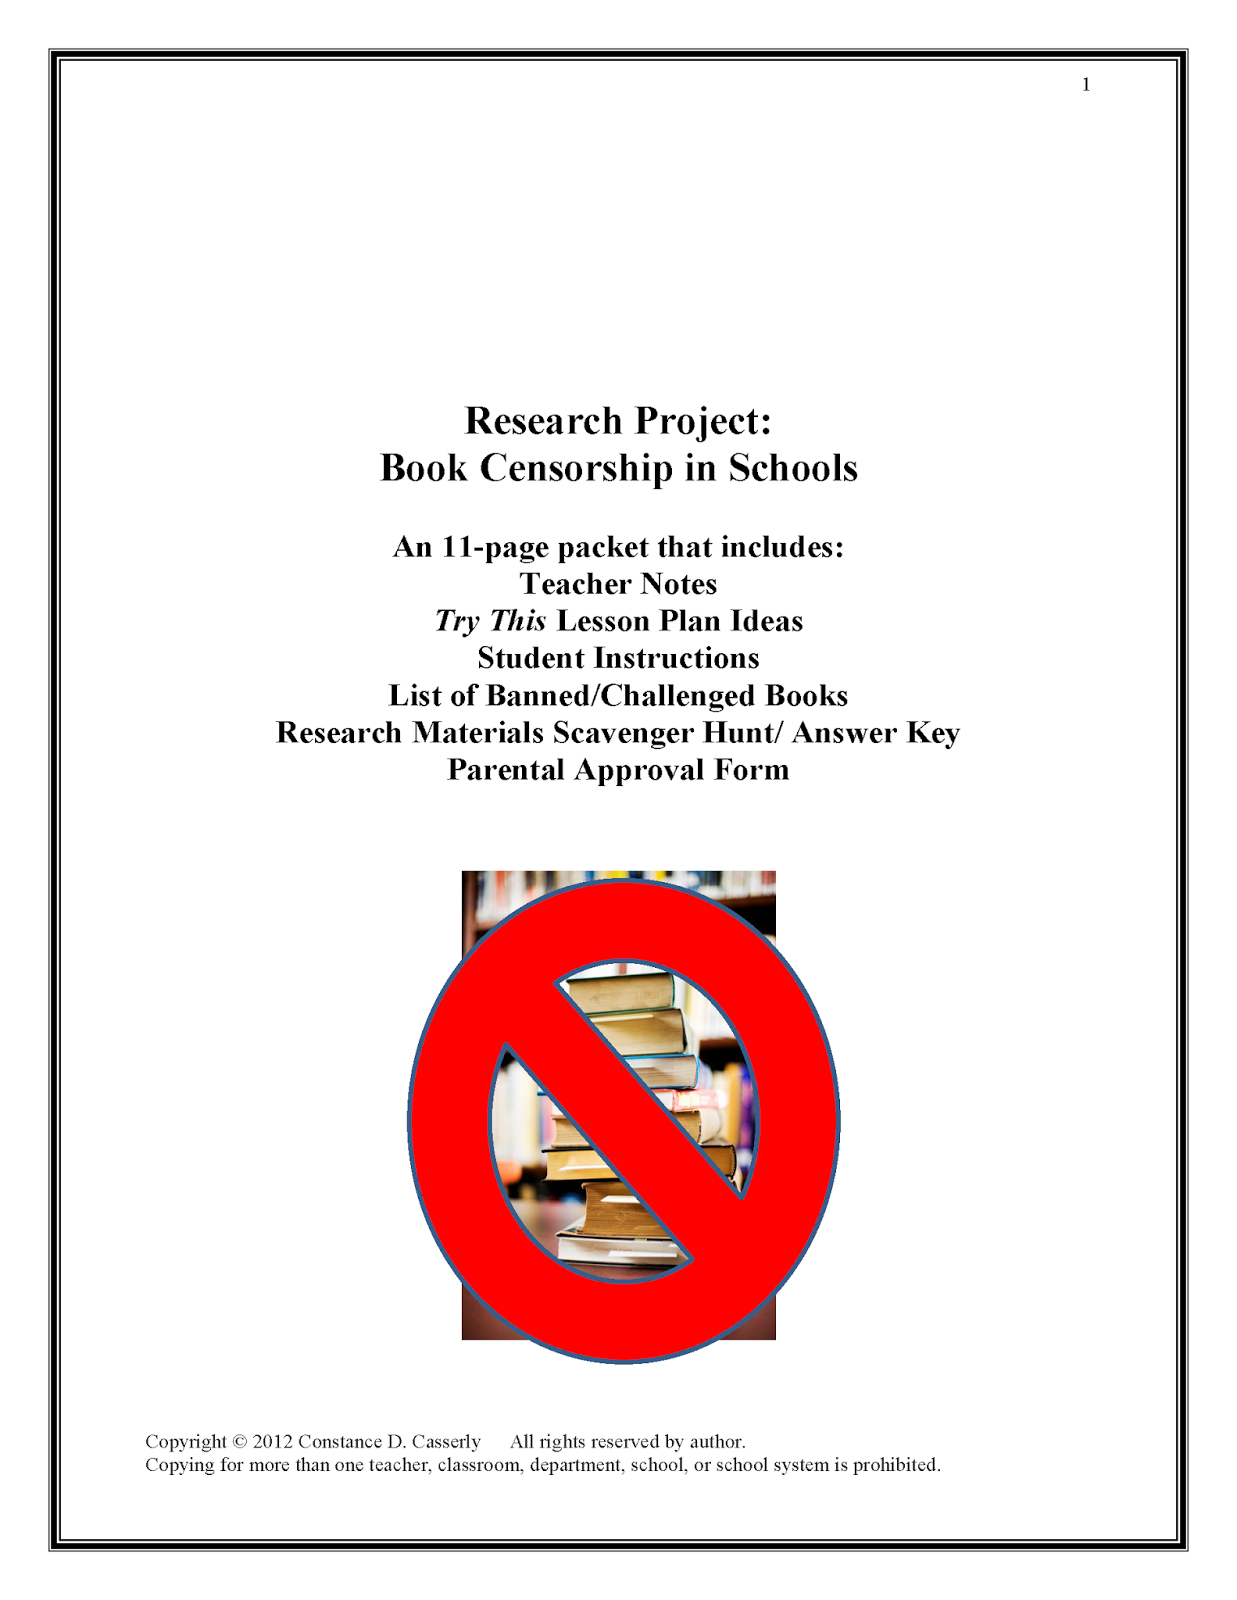 Banned Books Research Project